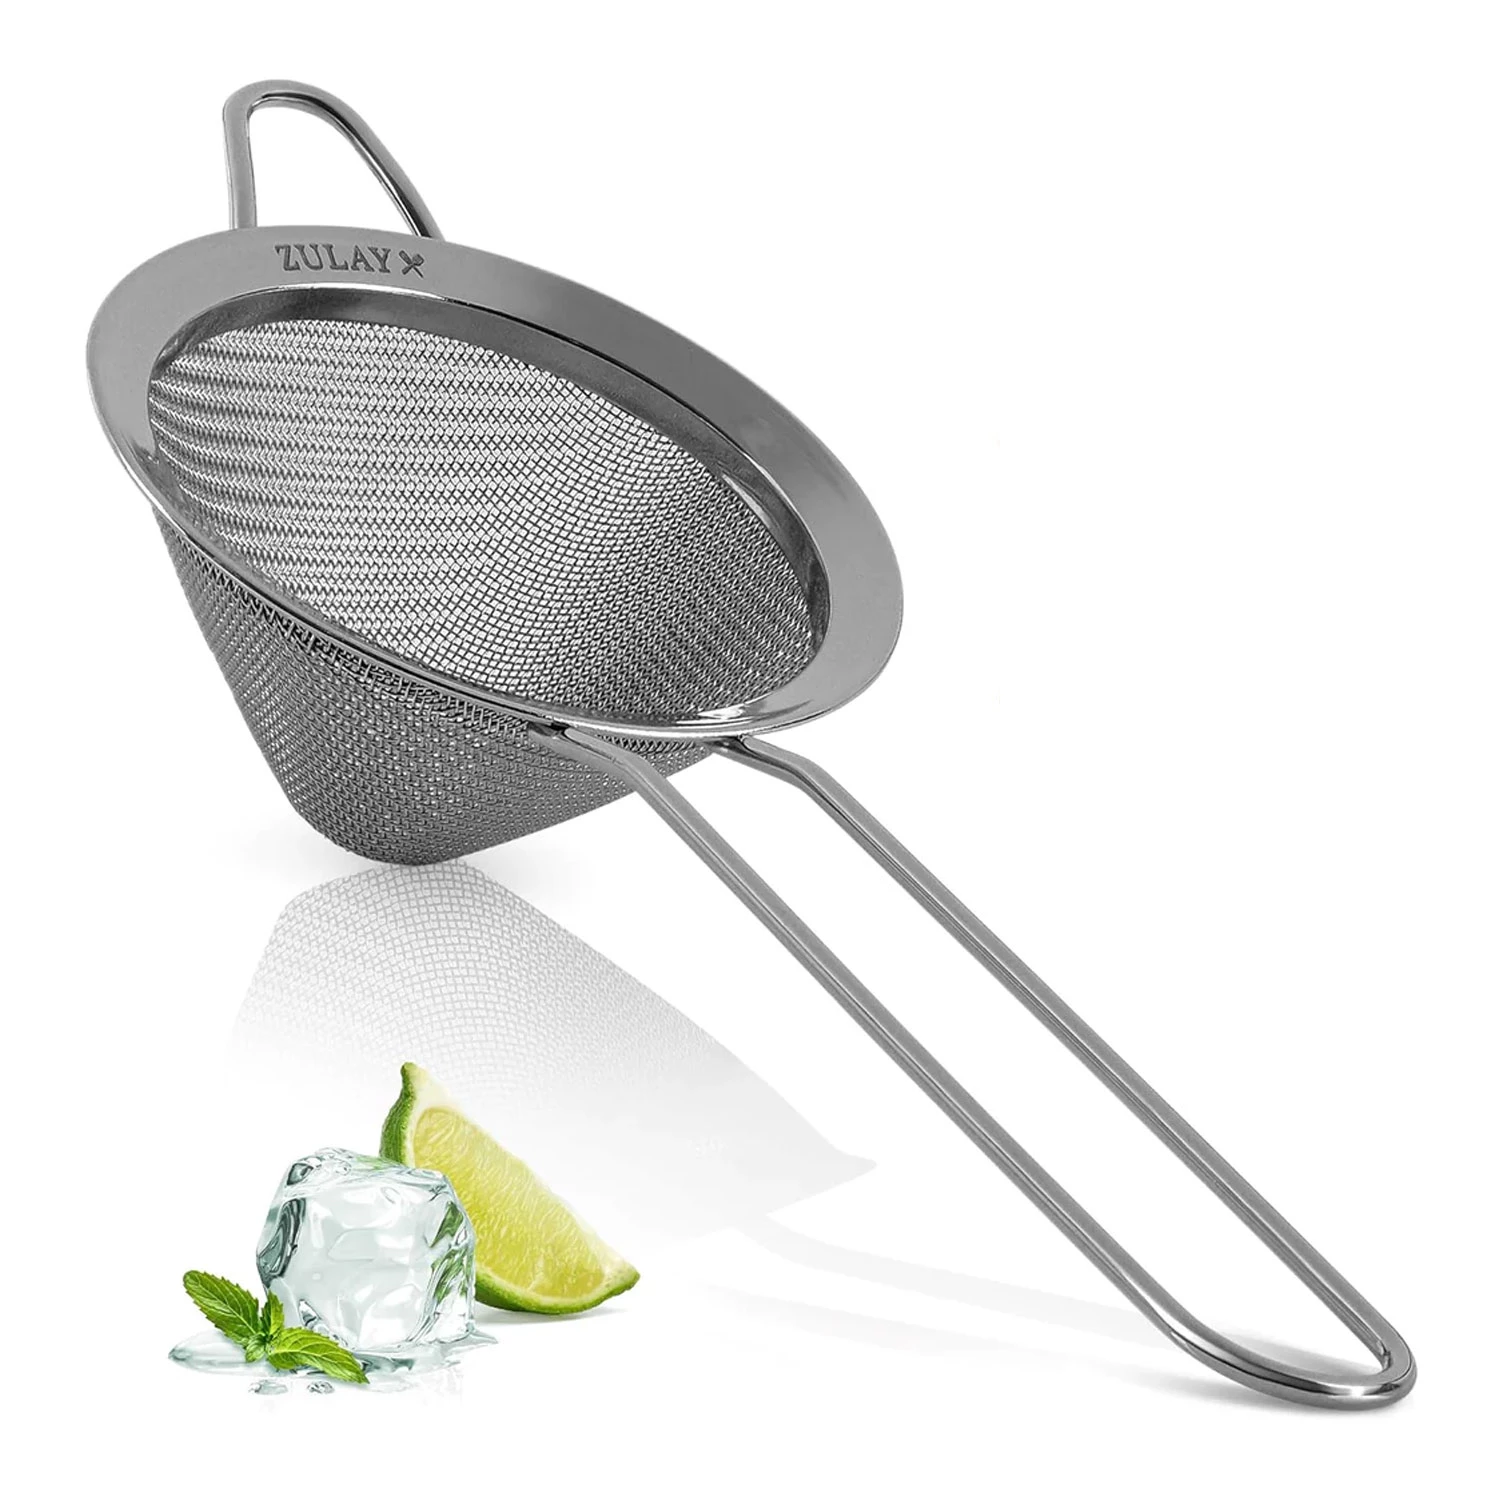 Cone Shaped Cocktail Strainer